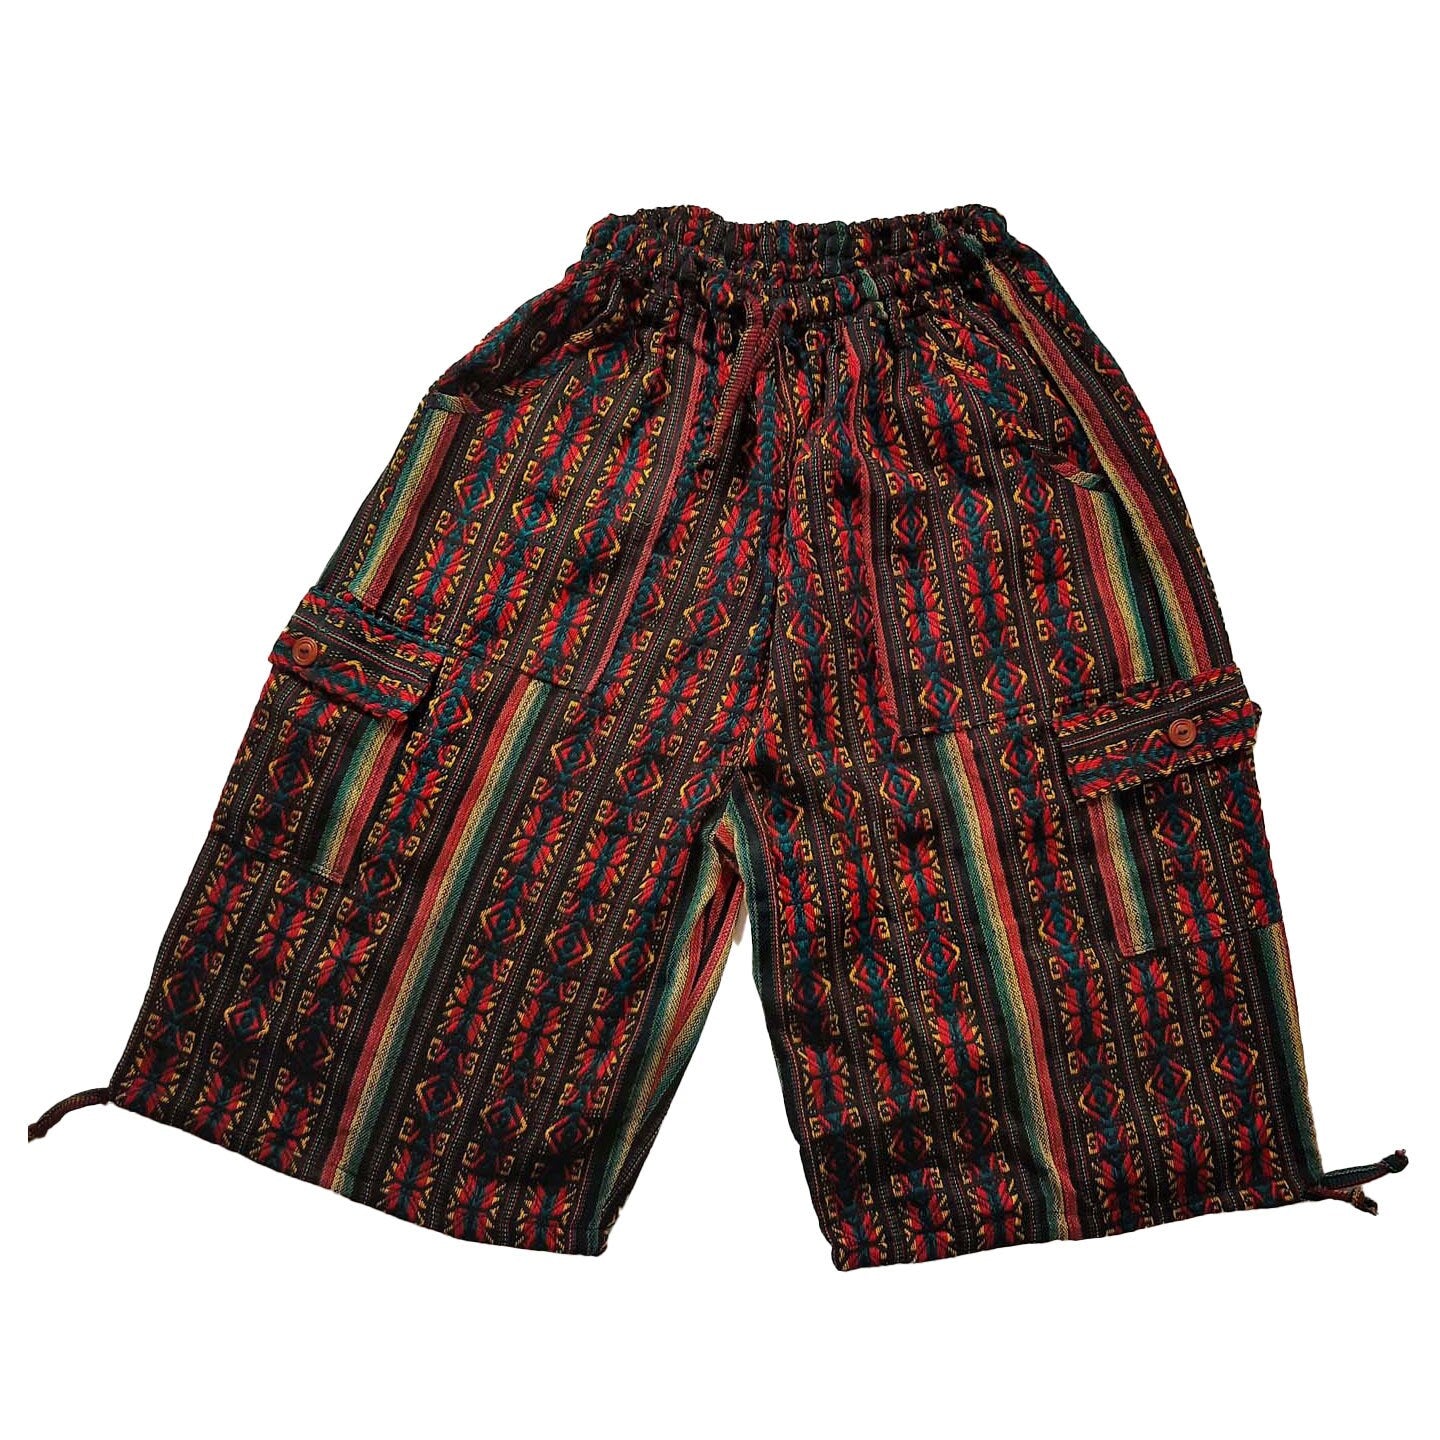 Shorts Size XL | Rasta Hippie Shorts | Comfy Clothes | Mens Cargo Shorts | Father's Day Gift